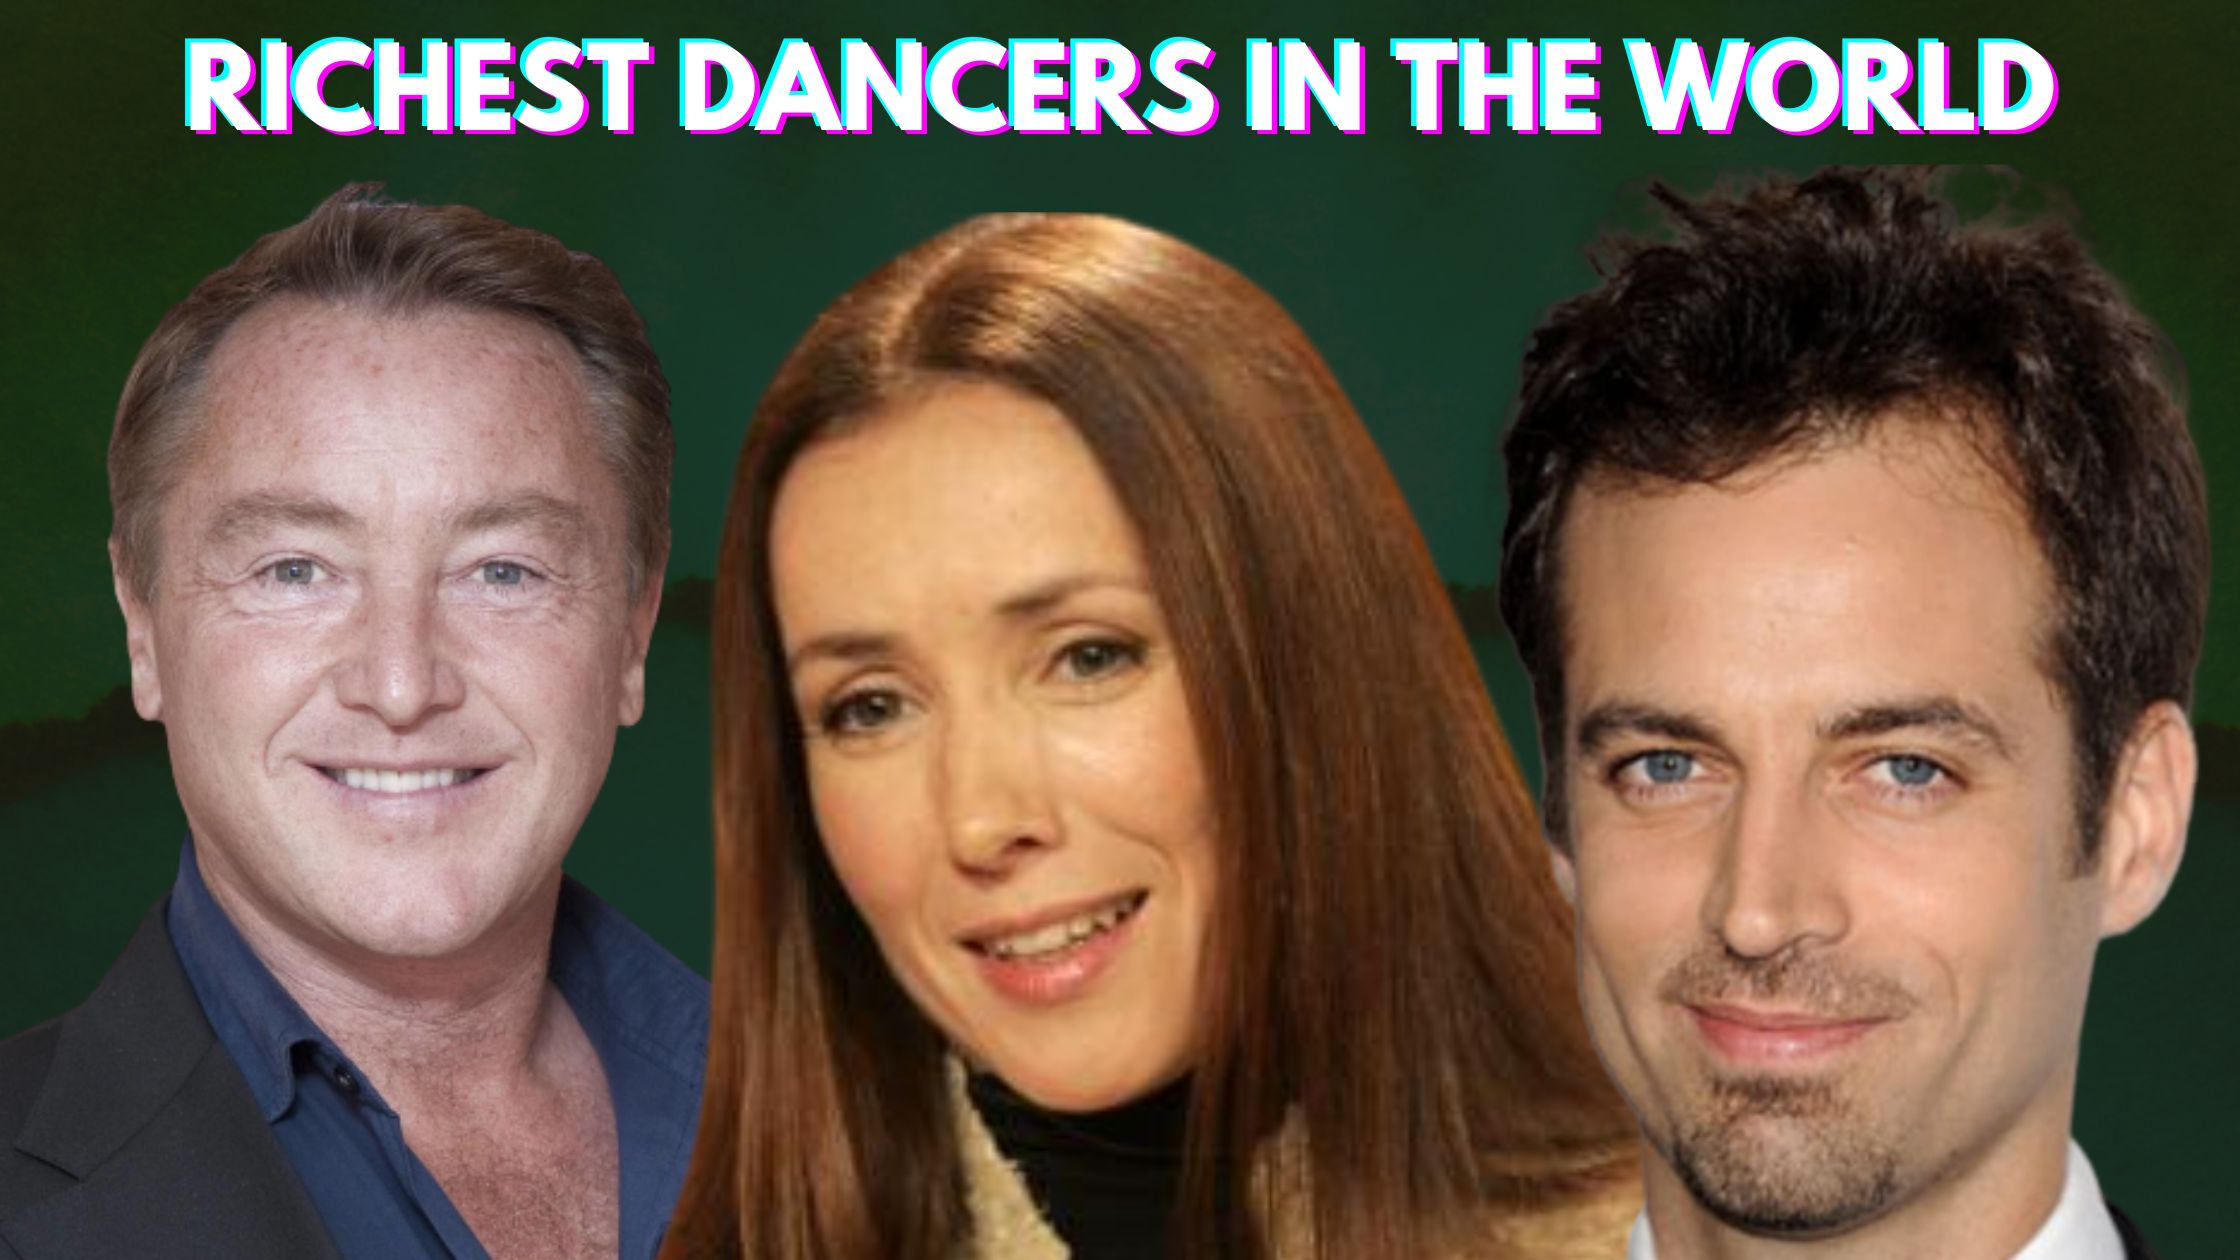 Richest Dancers in the World